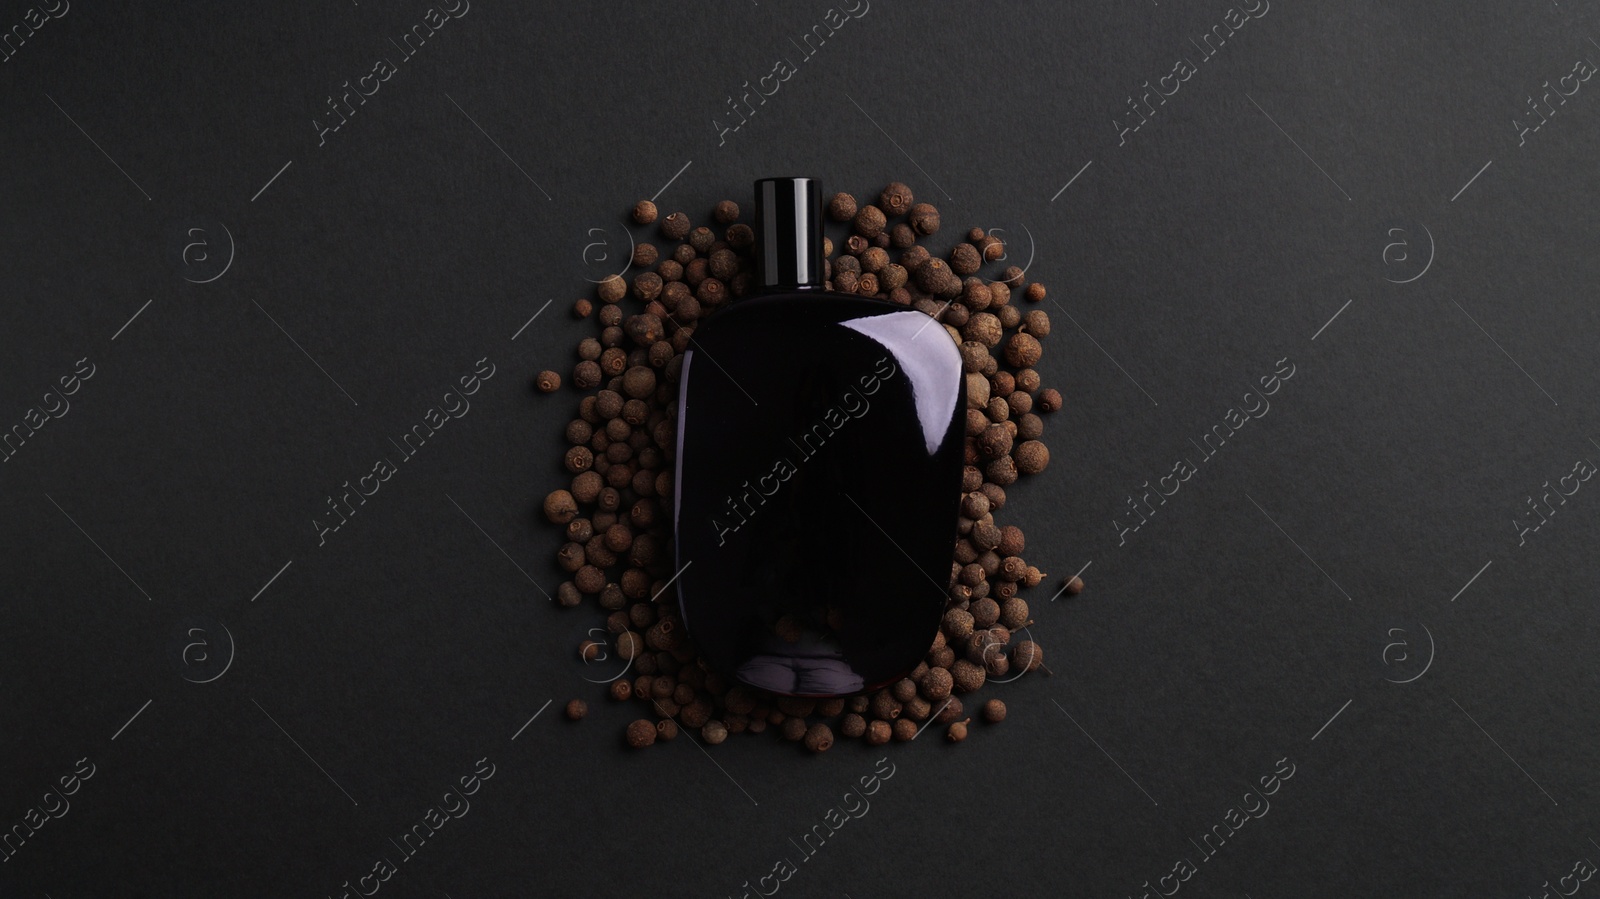 Photo of Bottle of perfume surrounded by allspice on dark background, top view